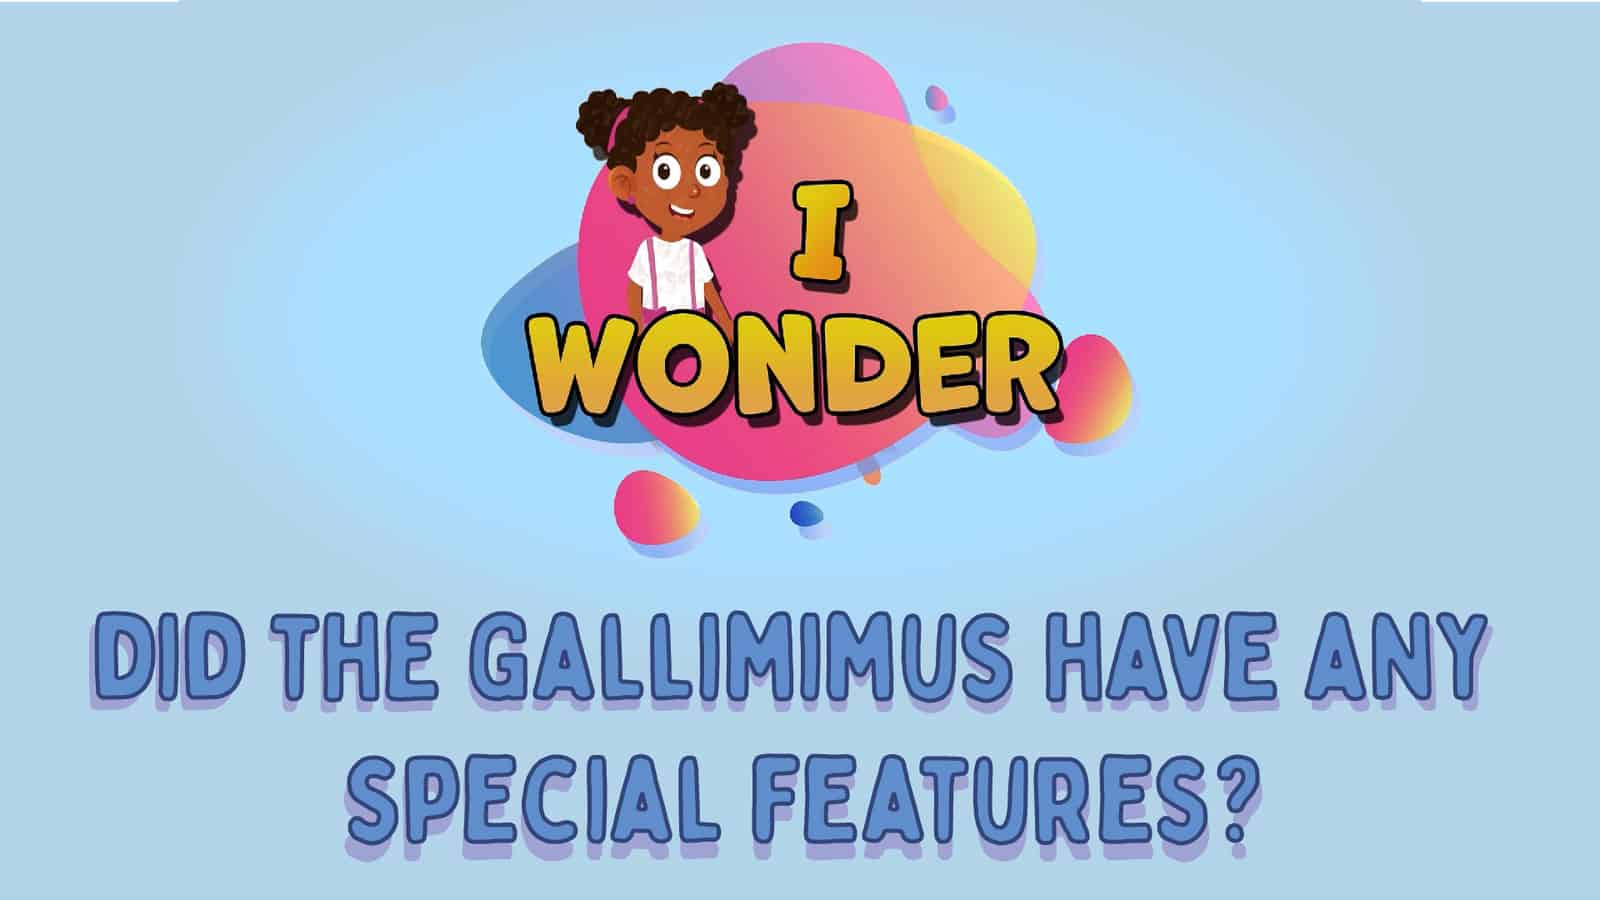 Did The Gallimimus Have Any Special Features?